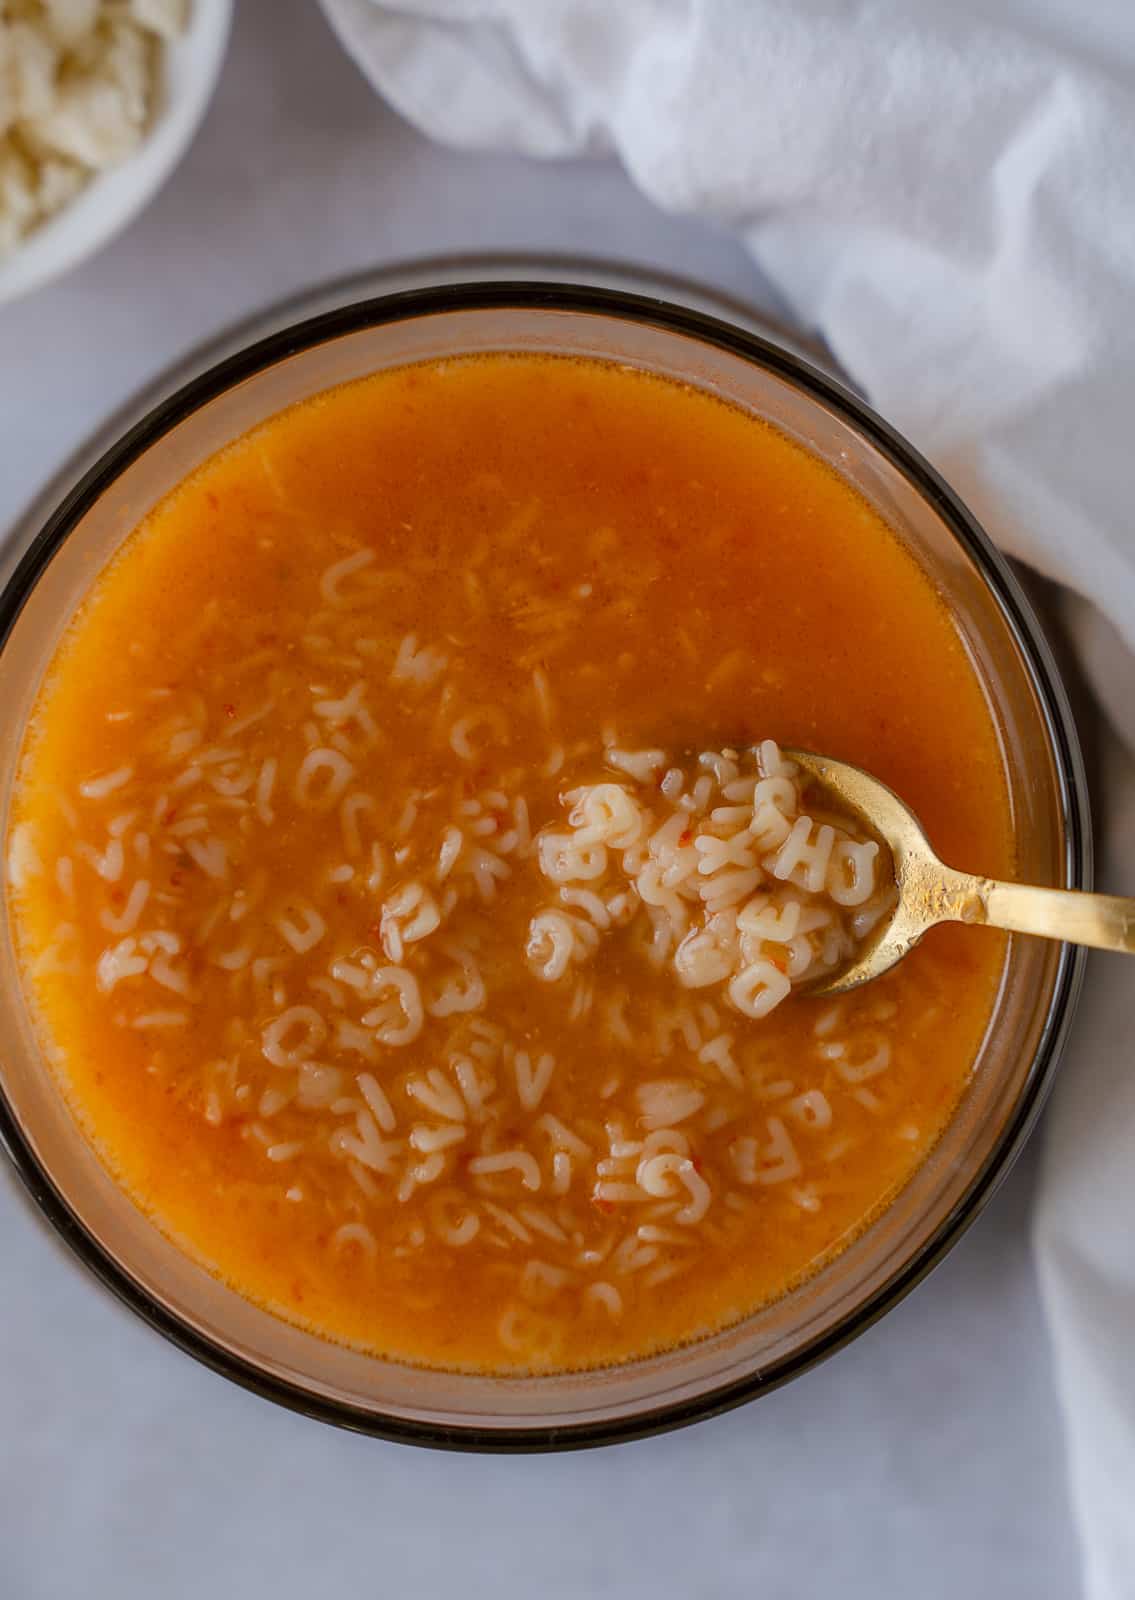 Sopa de Letras in a glass bowl with a gold spoon holding some pasta.